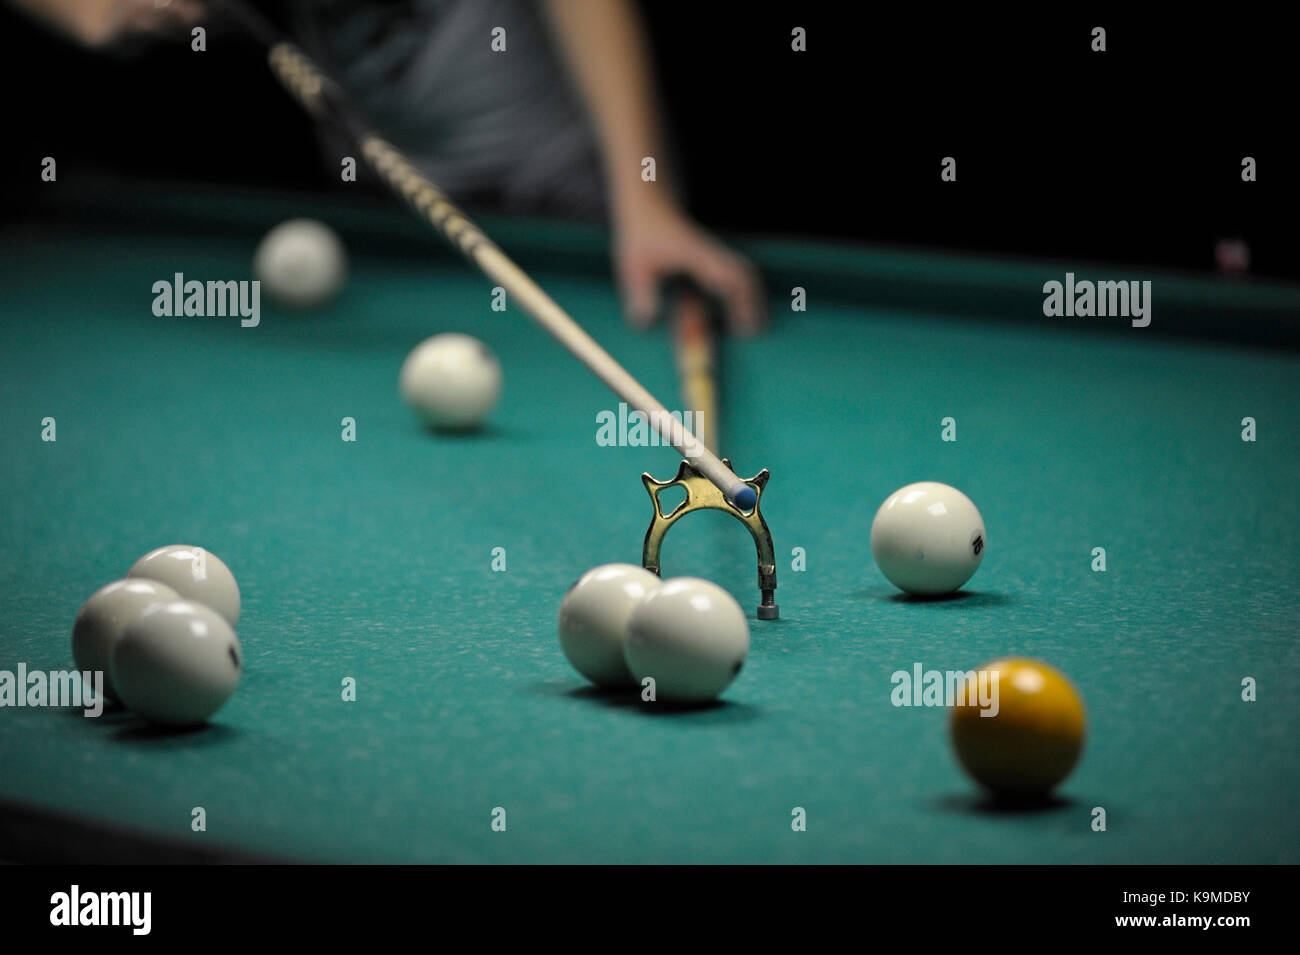 Billiard. A player's arm with a cue resting ready to stroke a ball Stock Photo